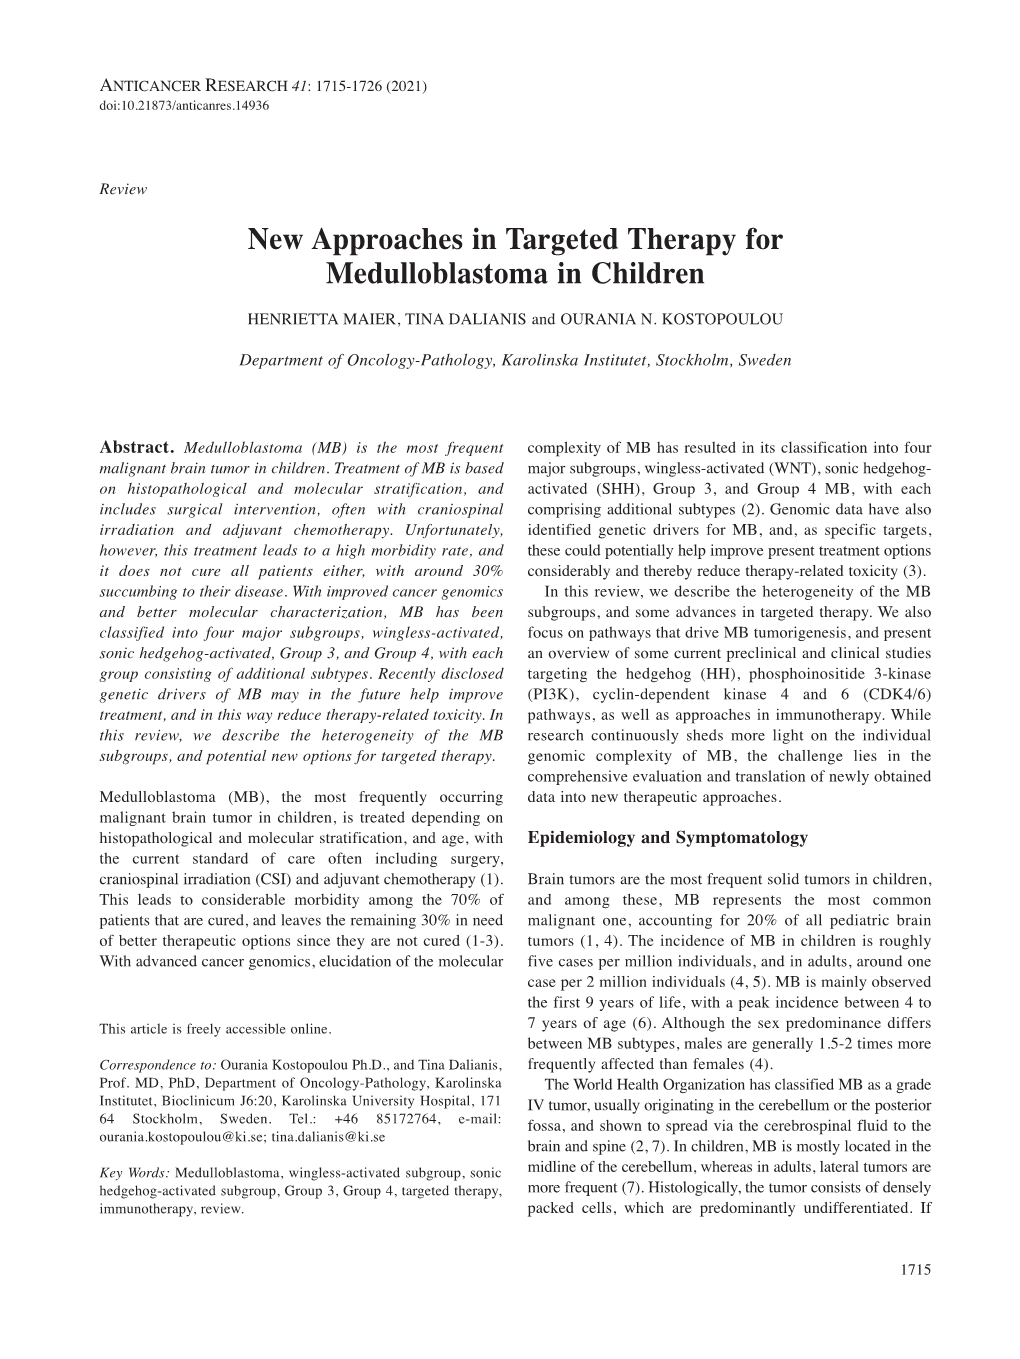 New Approaches in Targeted Therapy for Medulloblastoma in Children HENRIETTA MAIER, TINA DALIANIS and OURANIA N